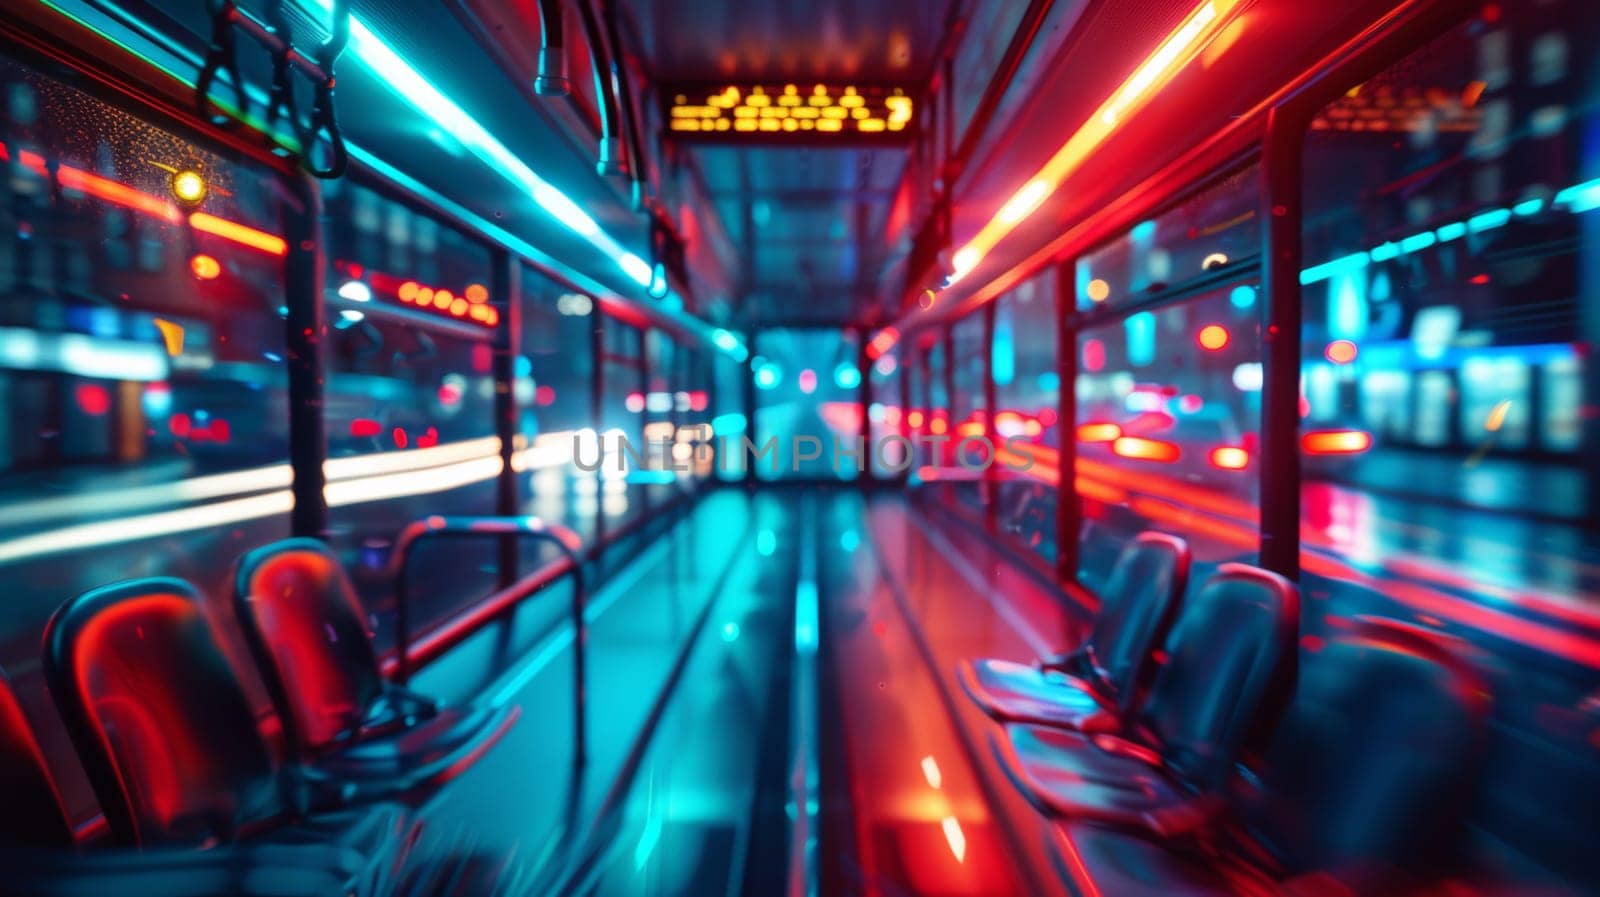 A blurry image of a bus with many seats and neon lights